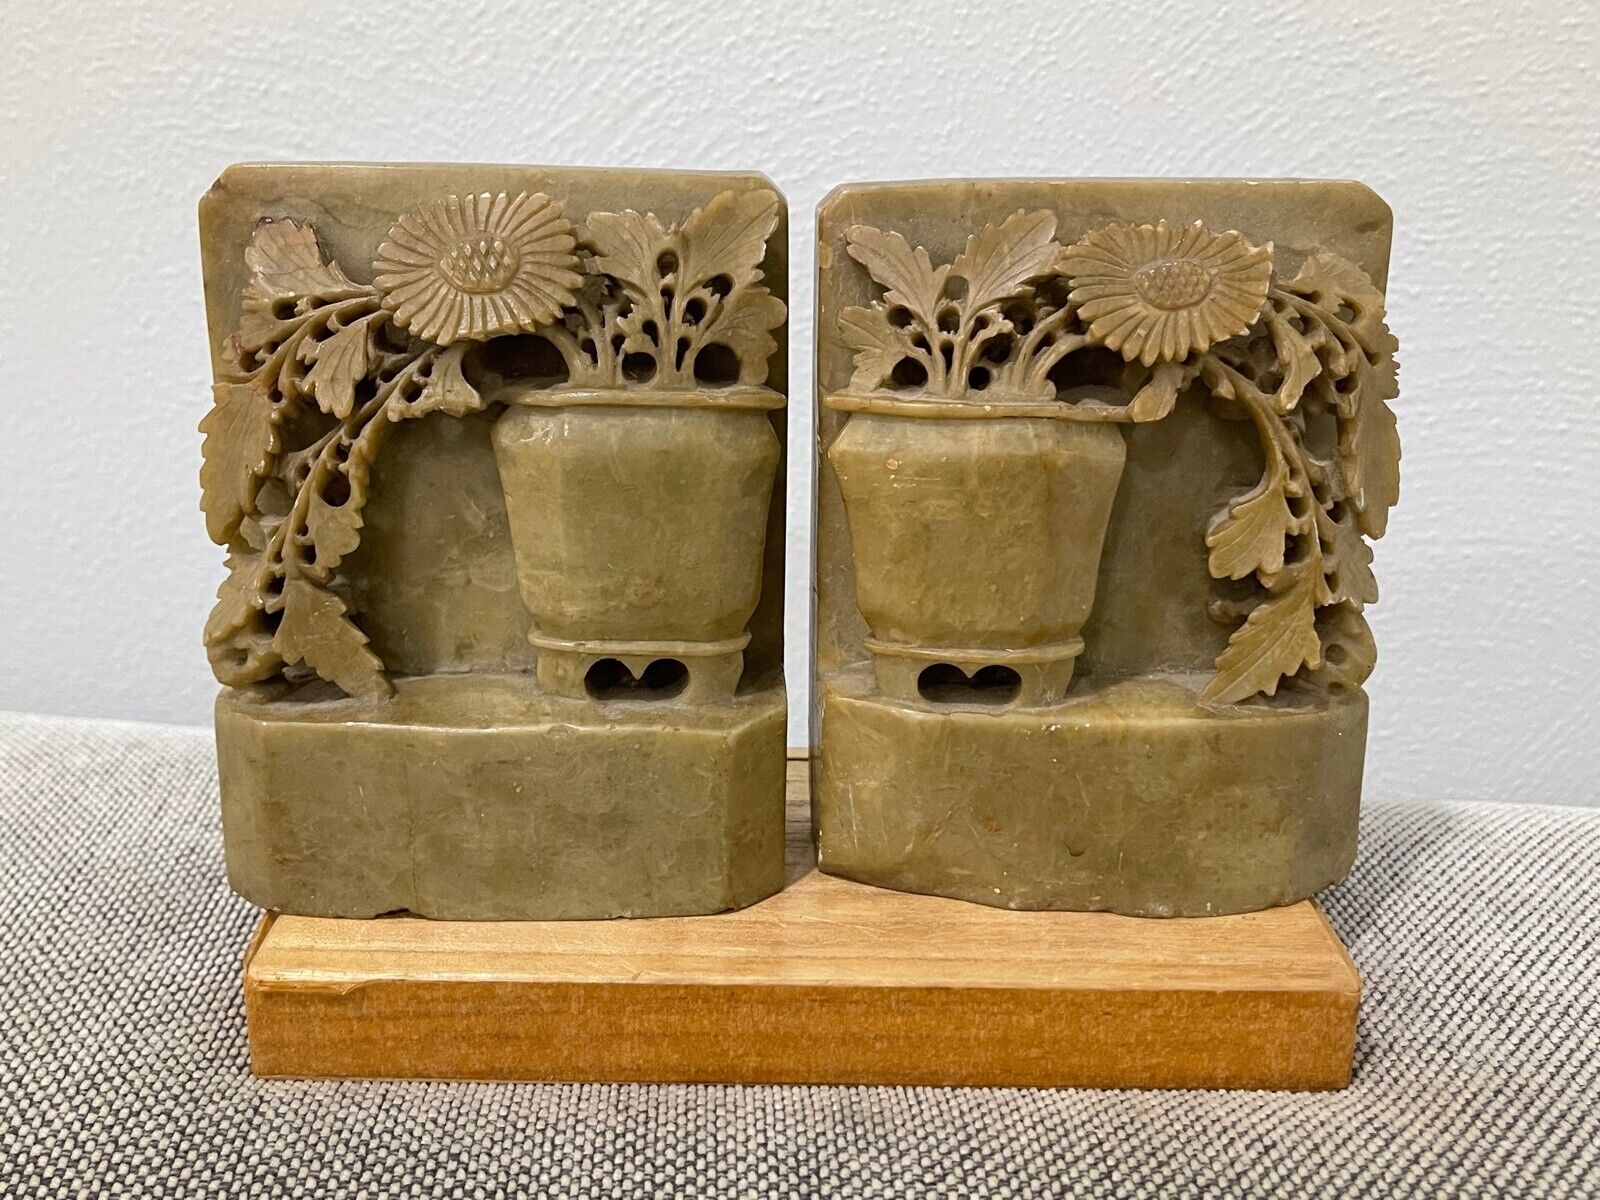 Vintage Antique Chinese Soapstone Carved Pair of Bookends w/ Vase & Flowers Dec.